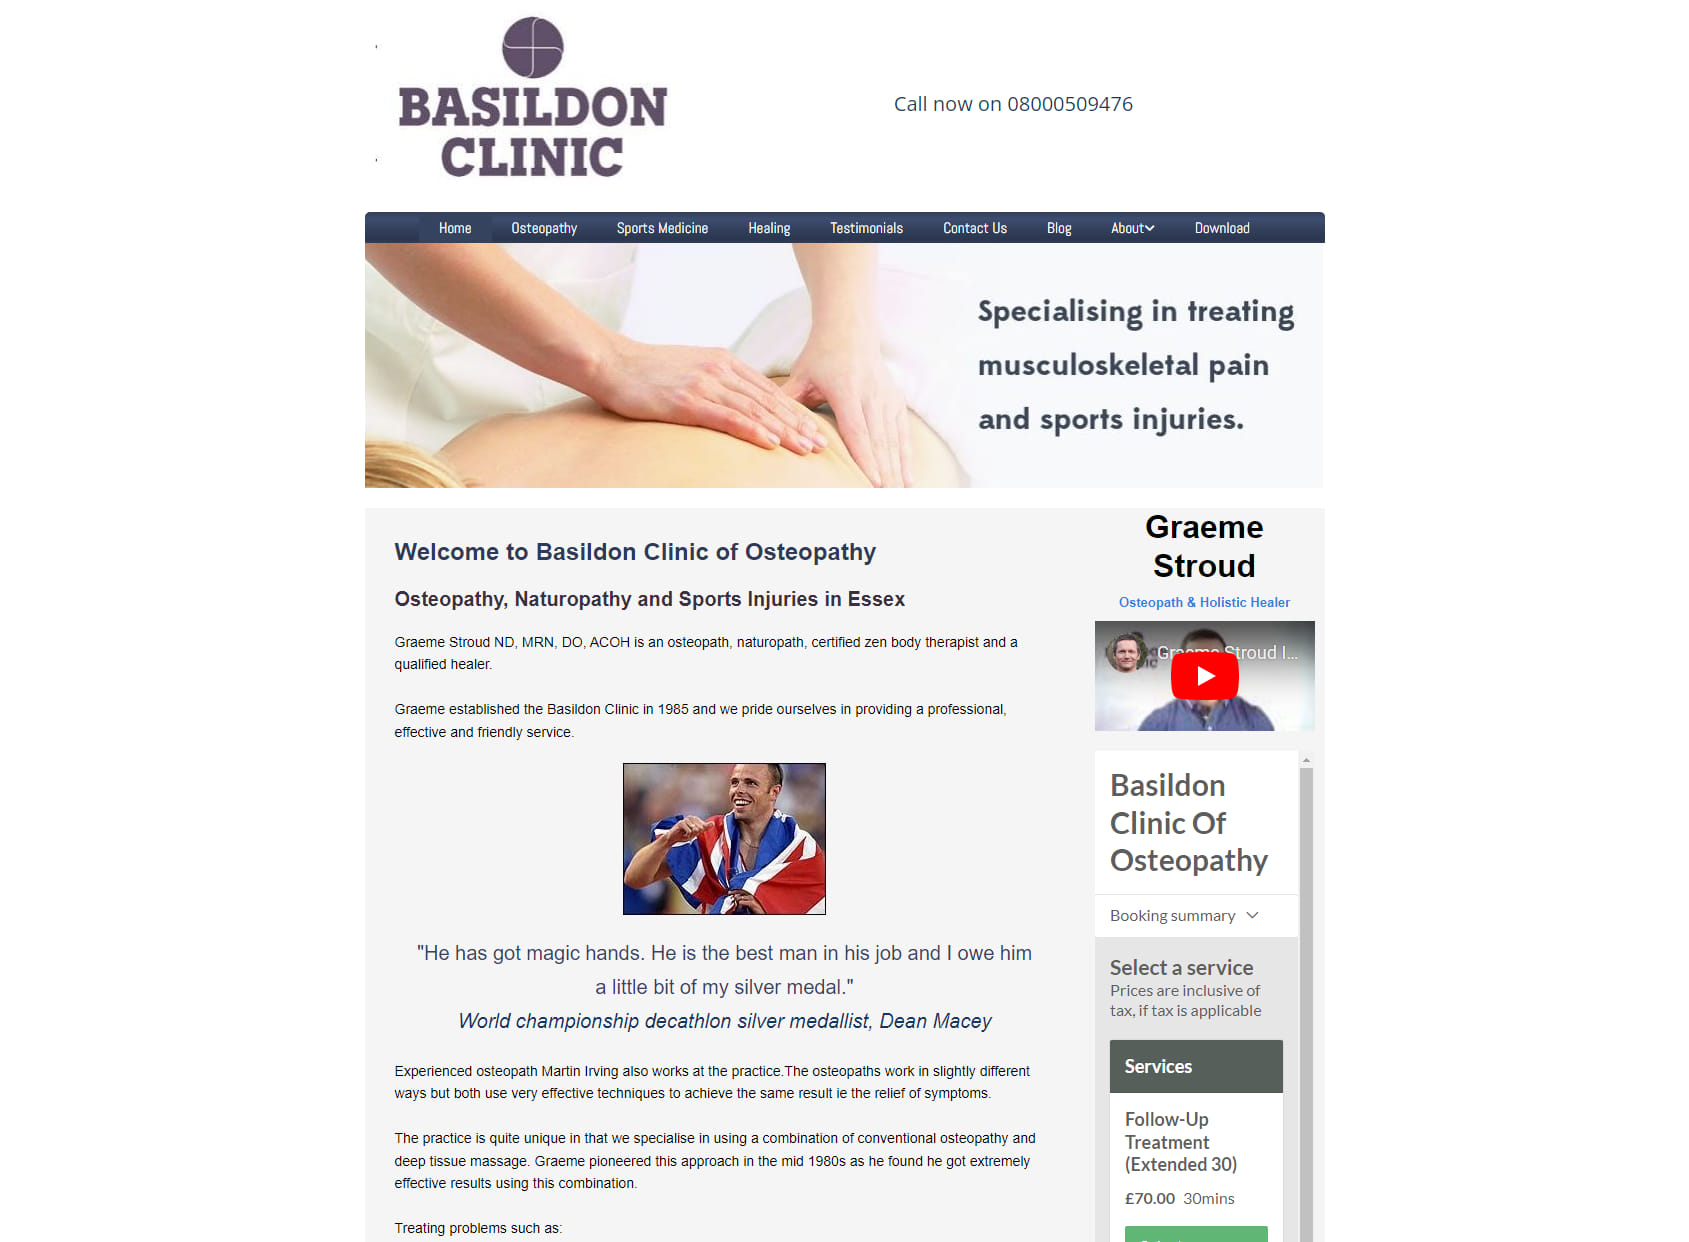 The Basildon Clinic of Osteopathy